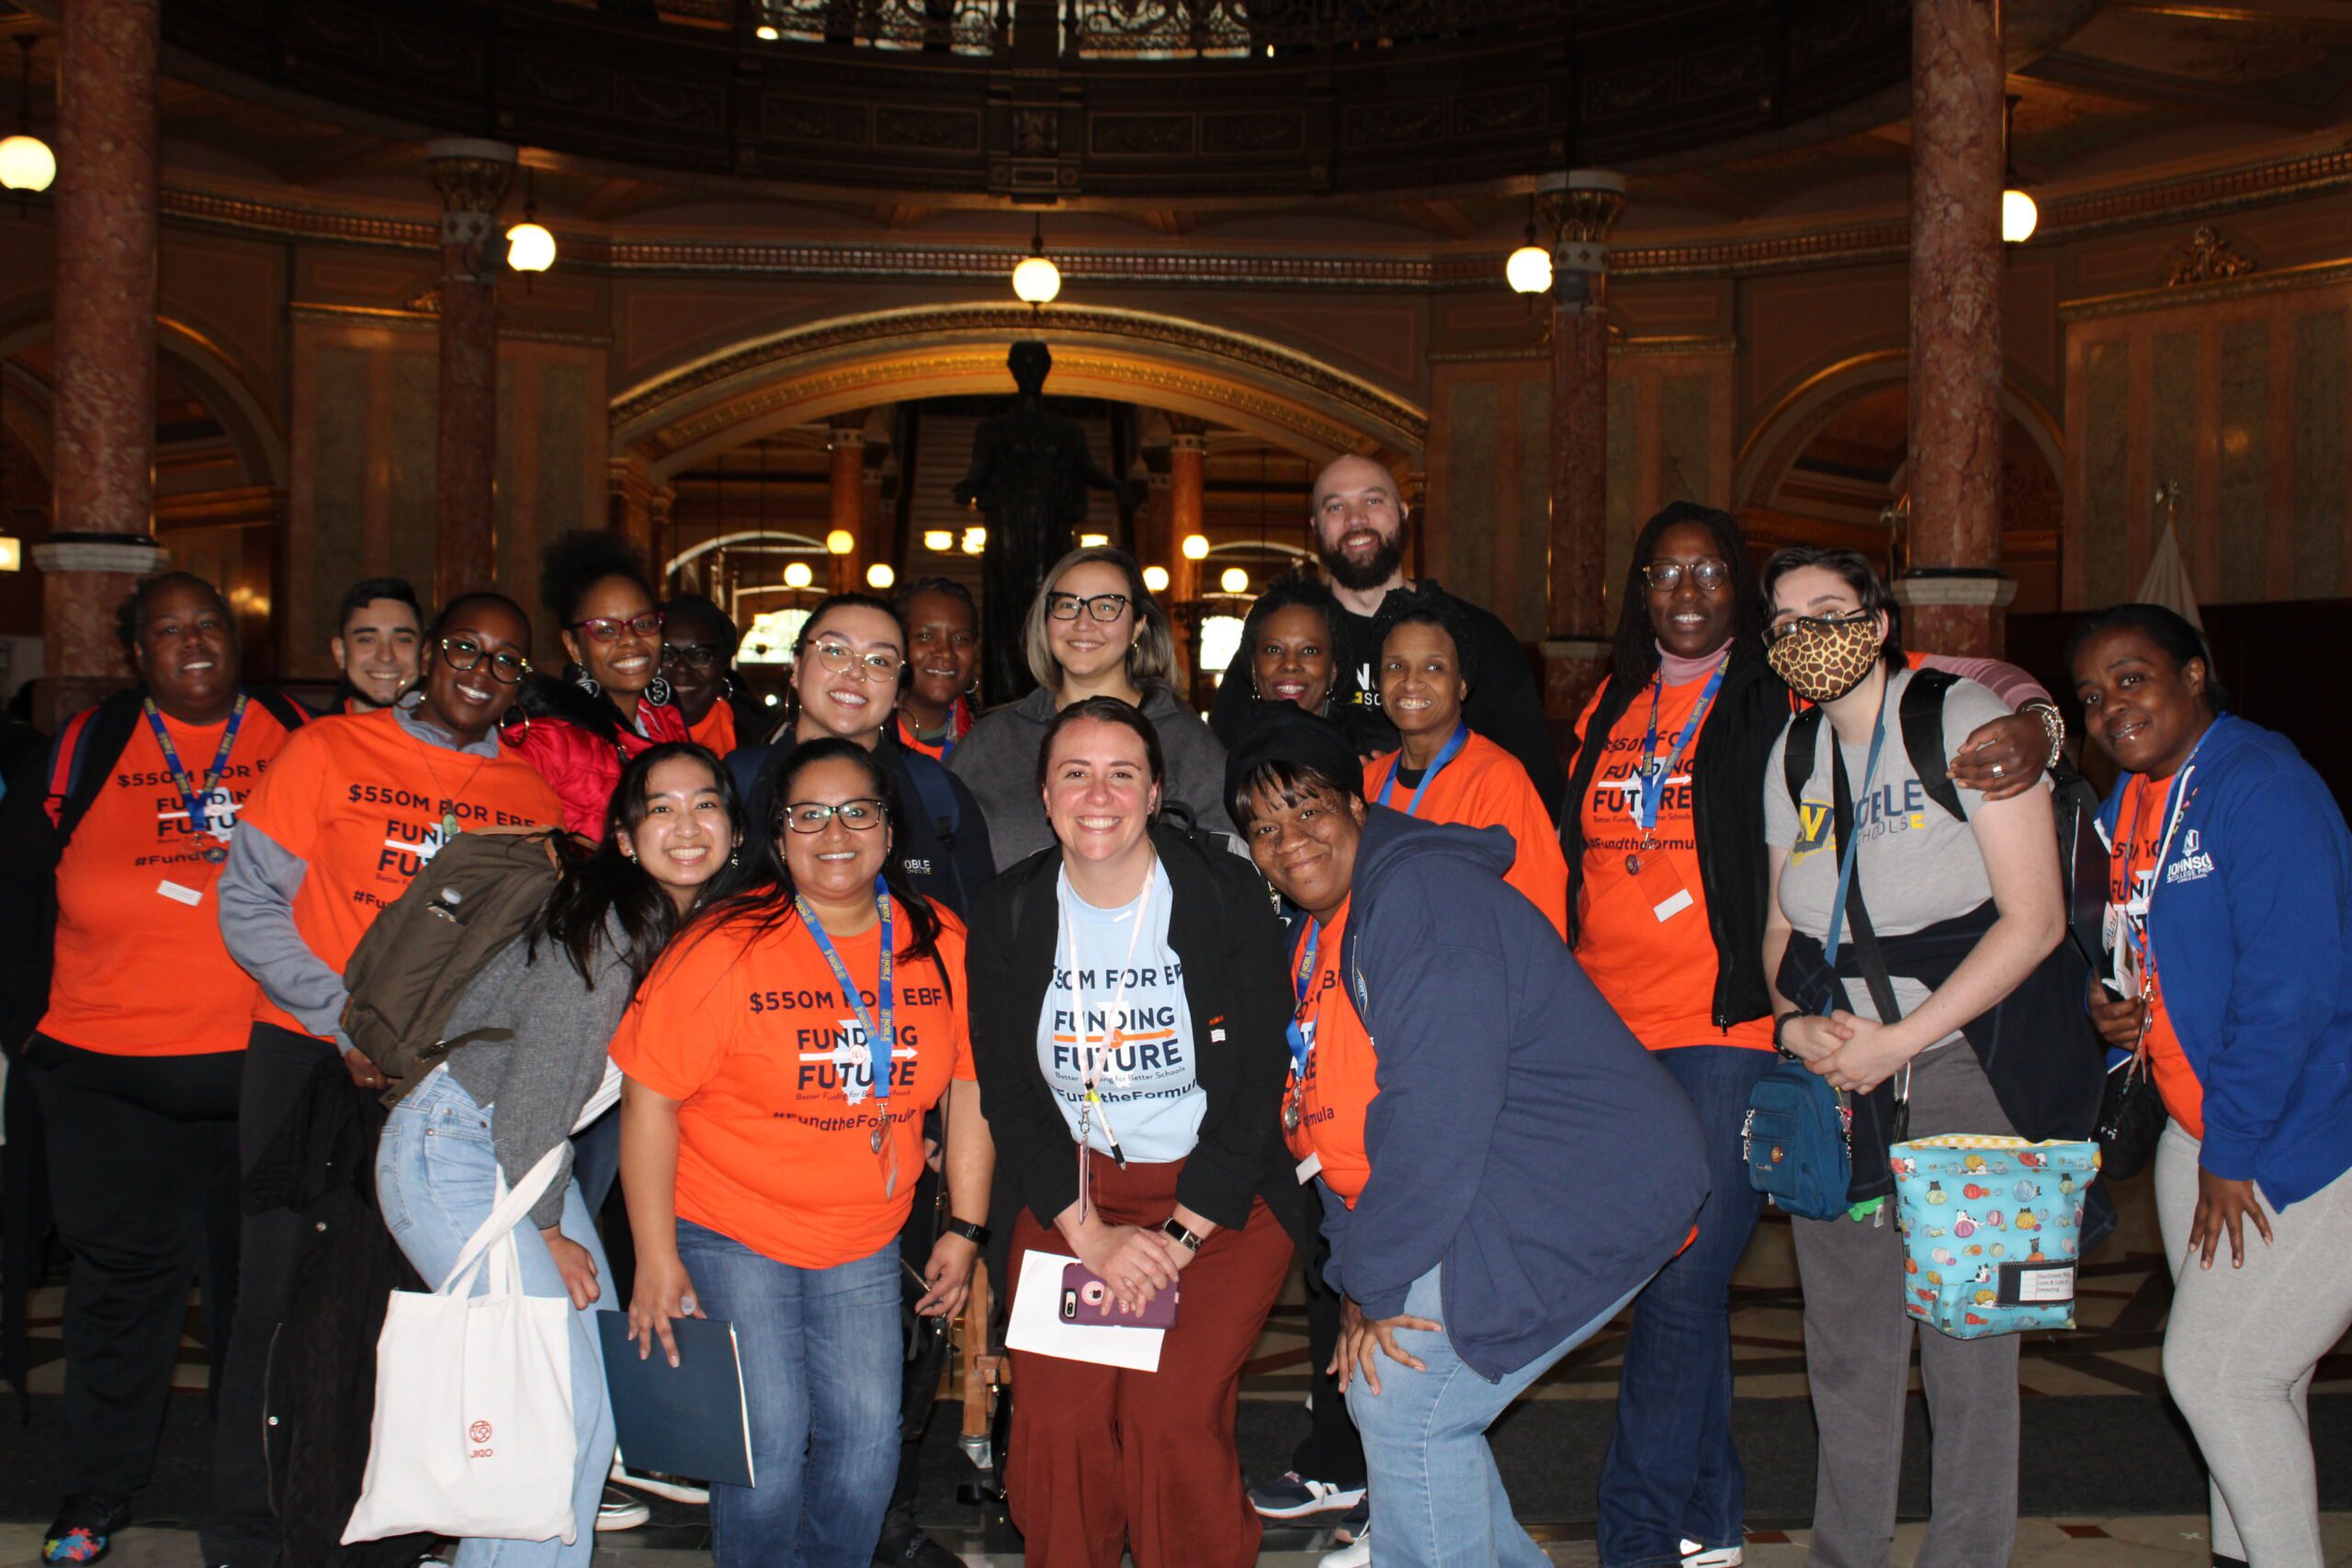 Image shows a group photo of Noble Schools' parents and staff standing in the Illinois State Capitol building's rotunda. Everyone is smiling and many are wearing bright orange shirts that say "$550M for Evidence-Based Funding" with the Funding Illinois Future logo on them. This photo was taken during Noble Schools' Lobby Day trip in April 2023.